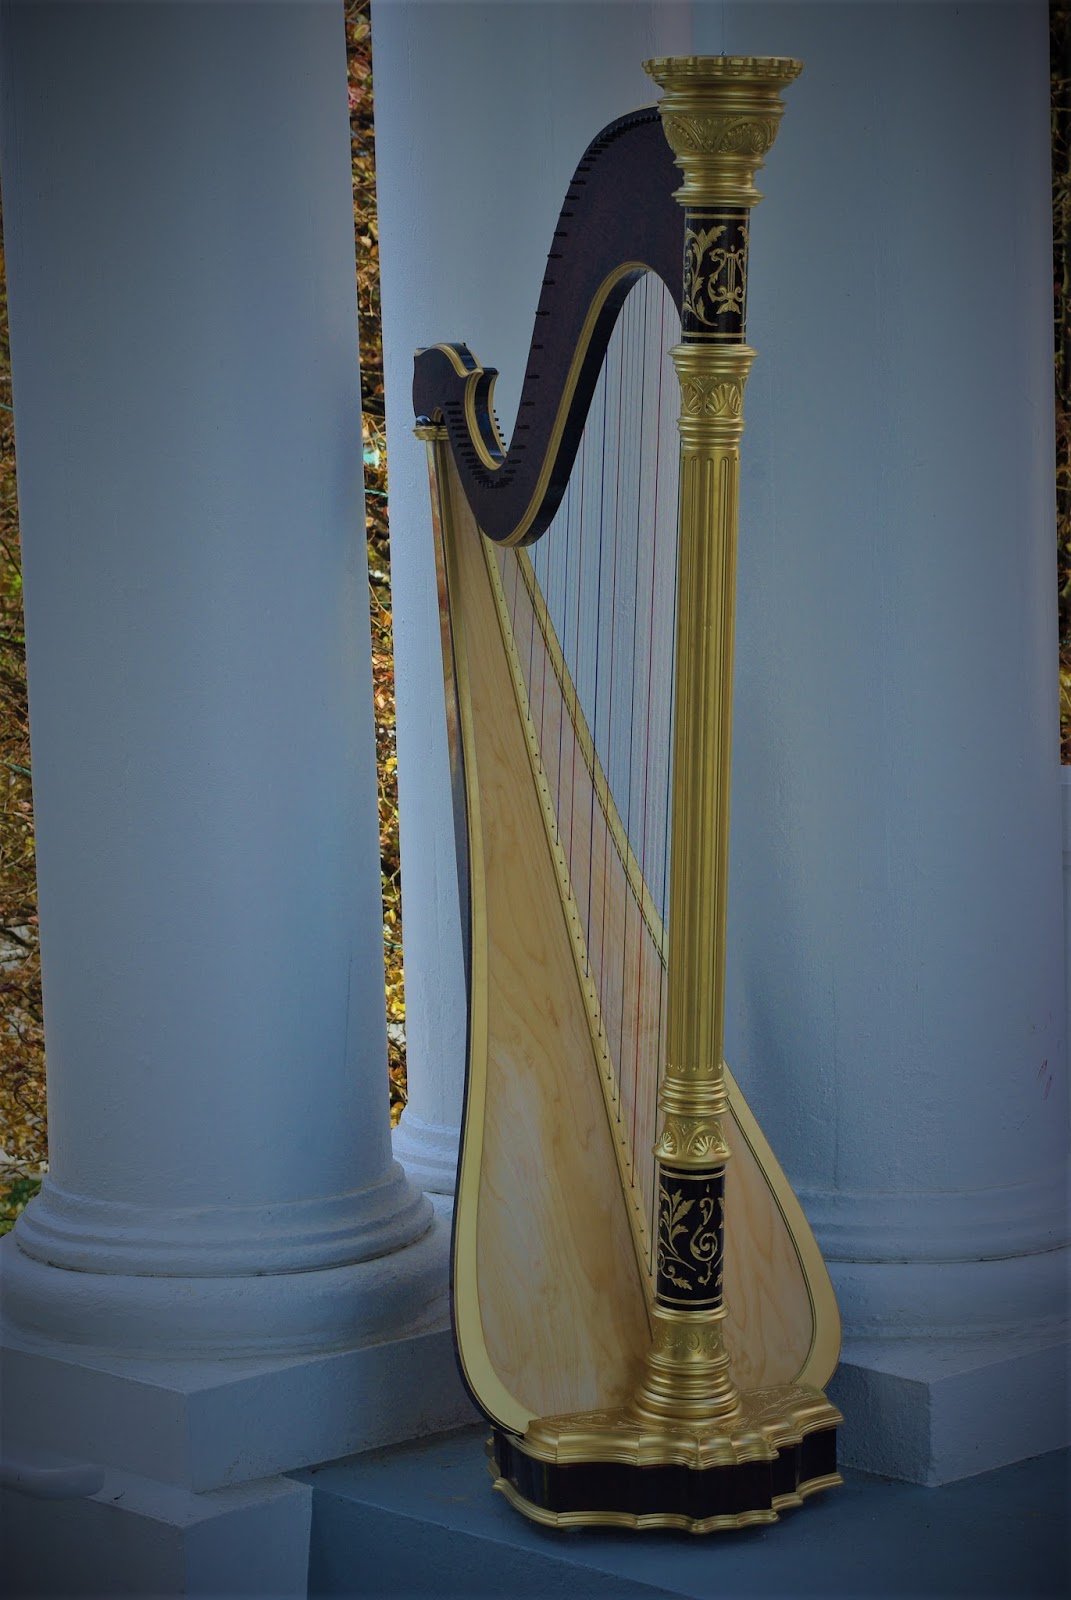 Center Stage Harps: The Grand Imperial Harp